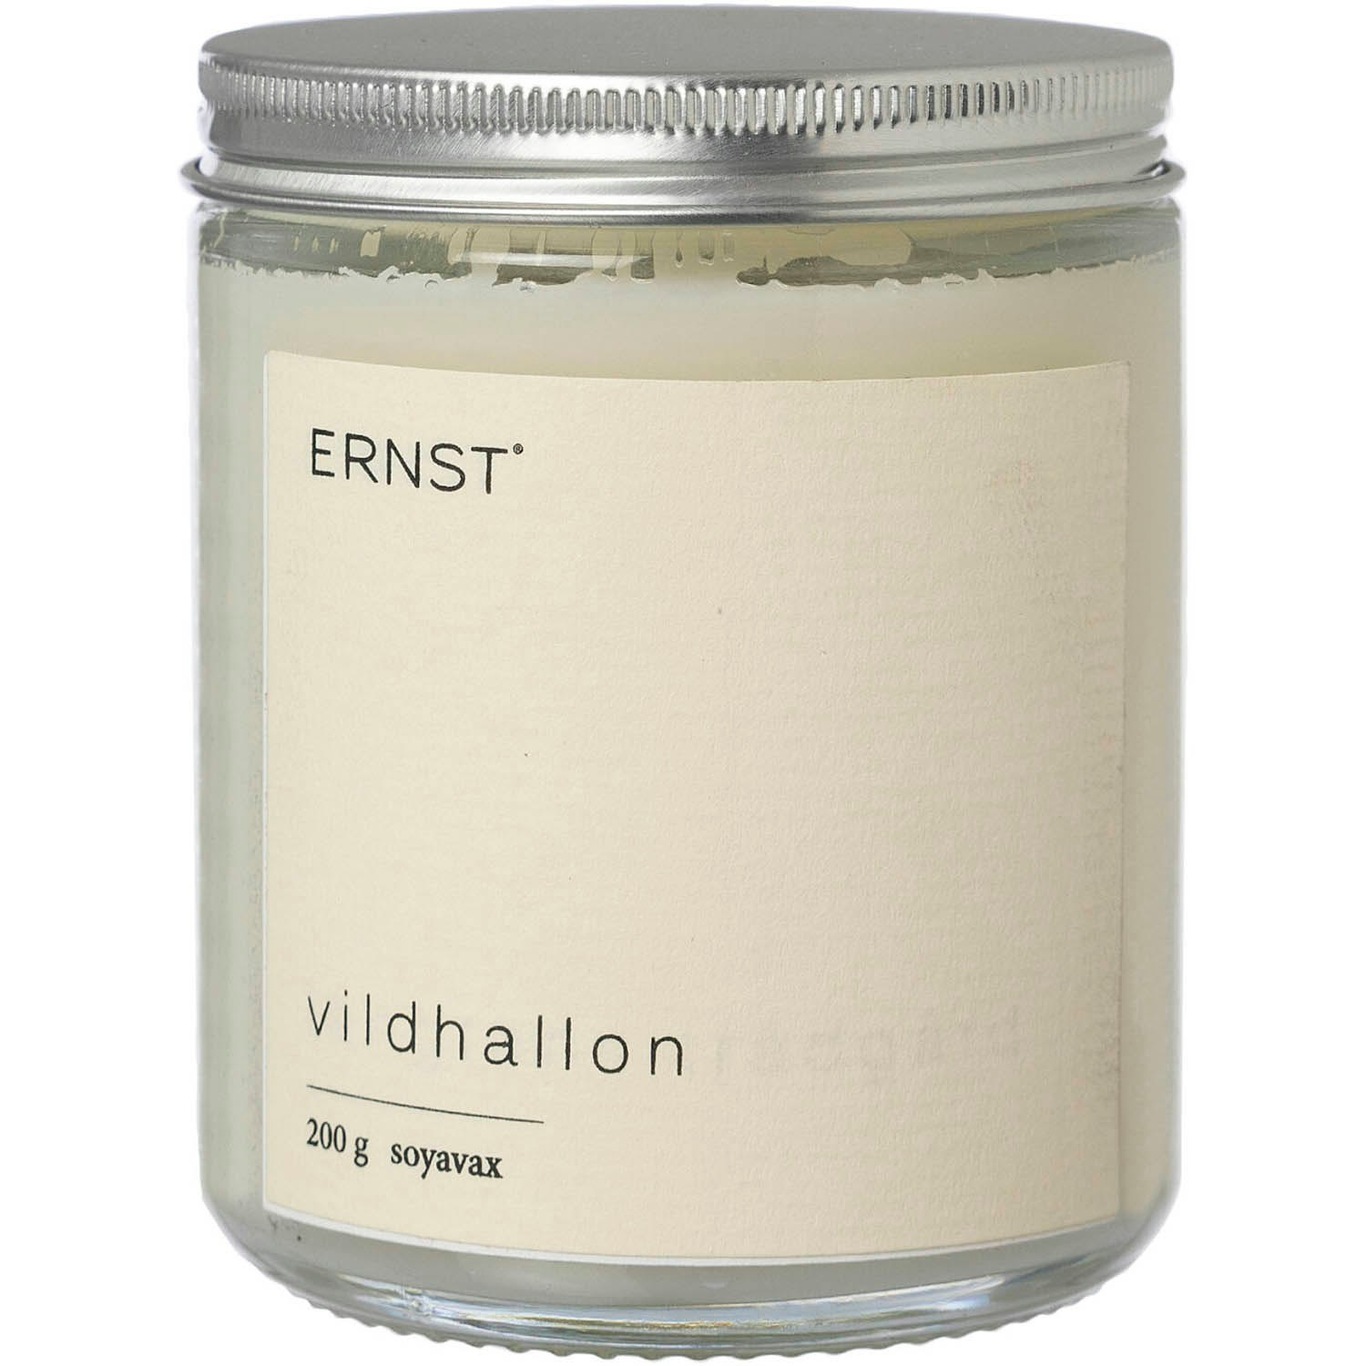 Scented Candle Vildhallon 200 g